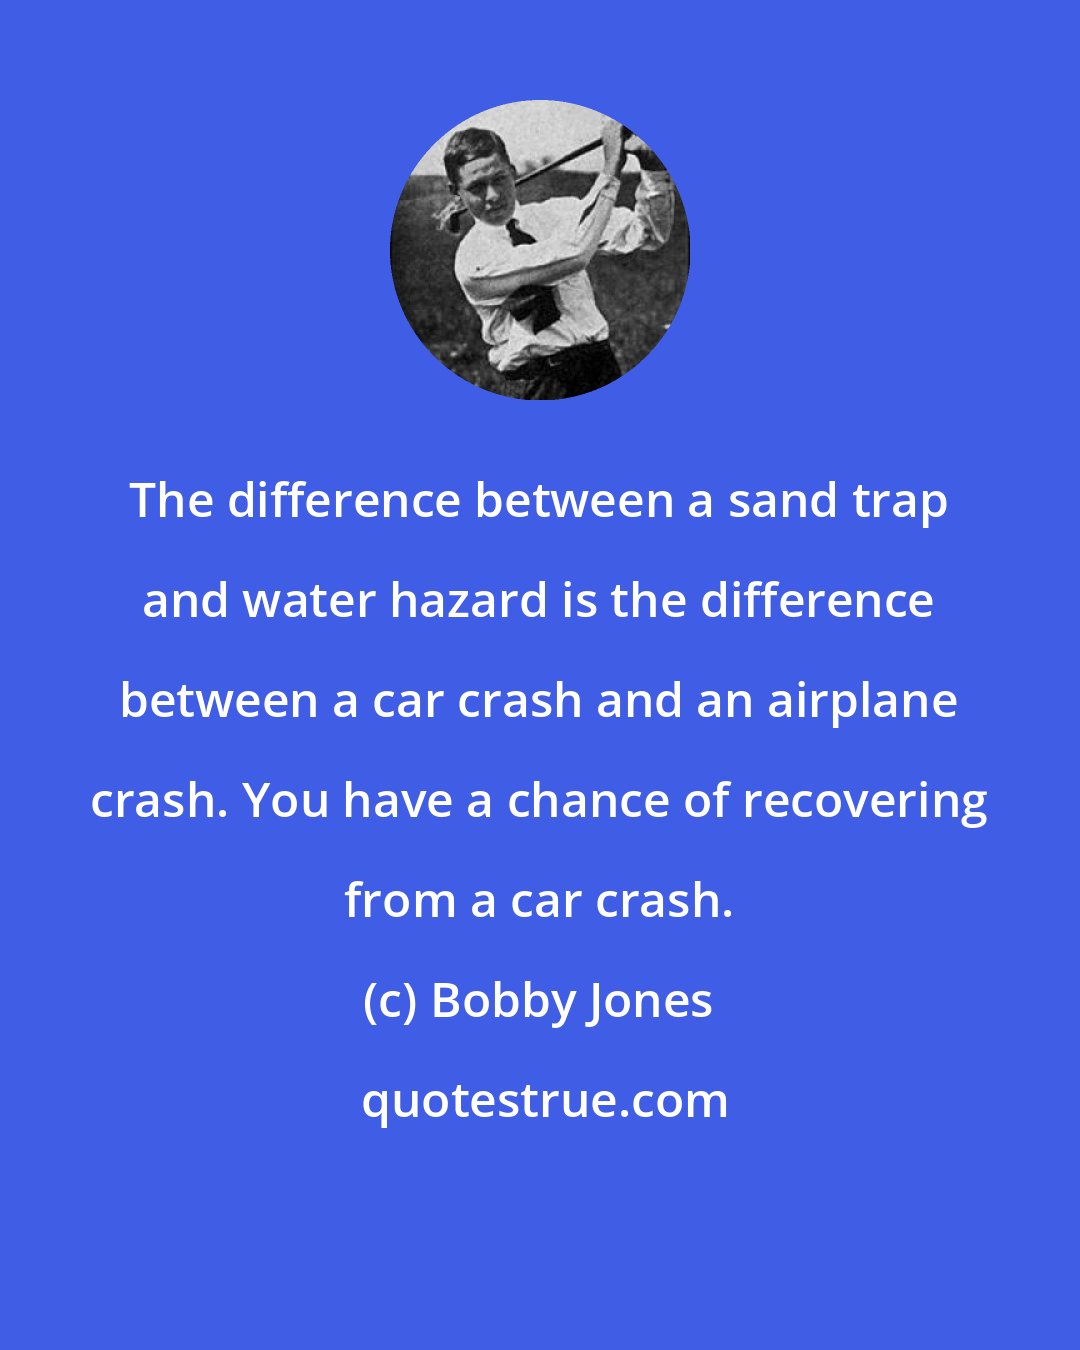 Bobby Jones: The difference between a sand trap and water hazard is the difference between a car crash and an airplane crash. You have a chance of recovering from a car crash.